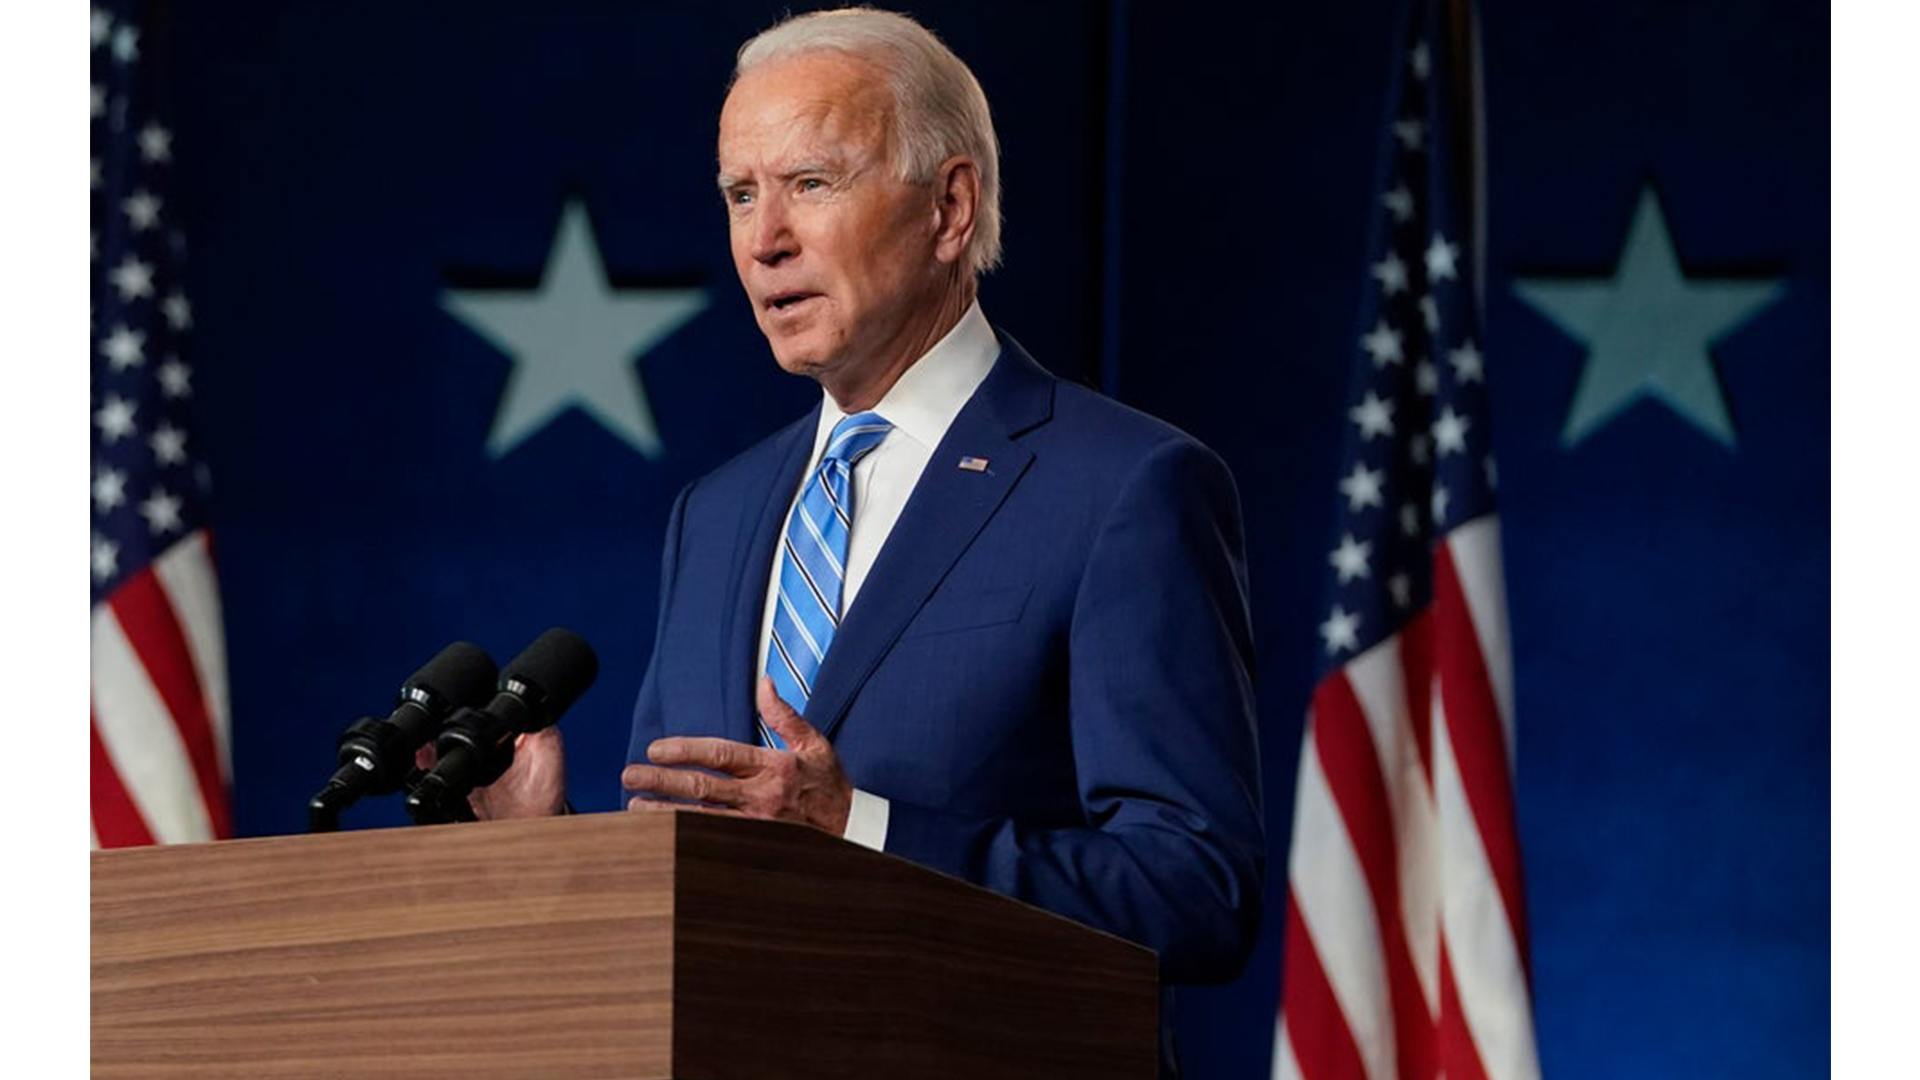 Biden to take oath today with high security measures